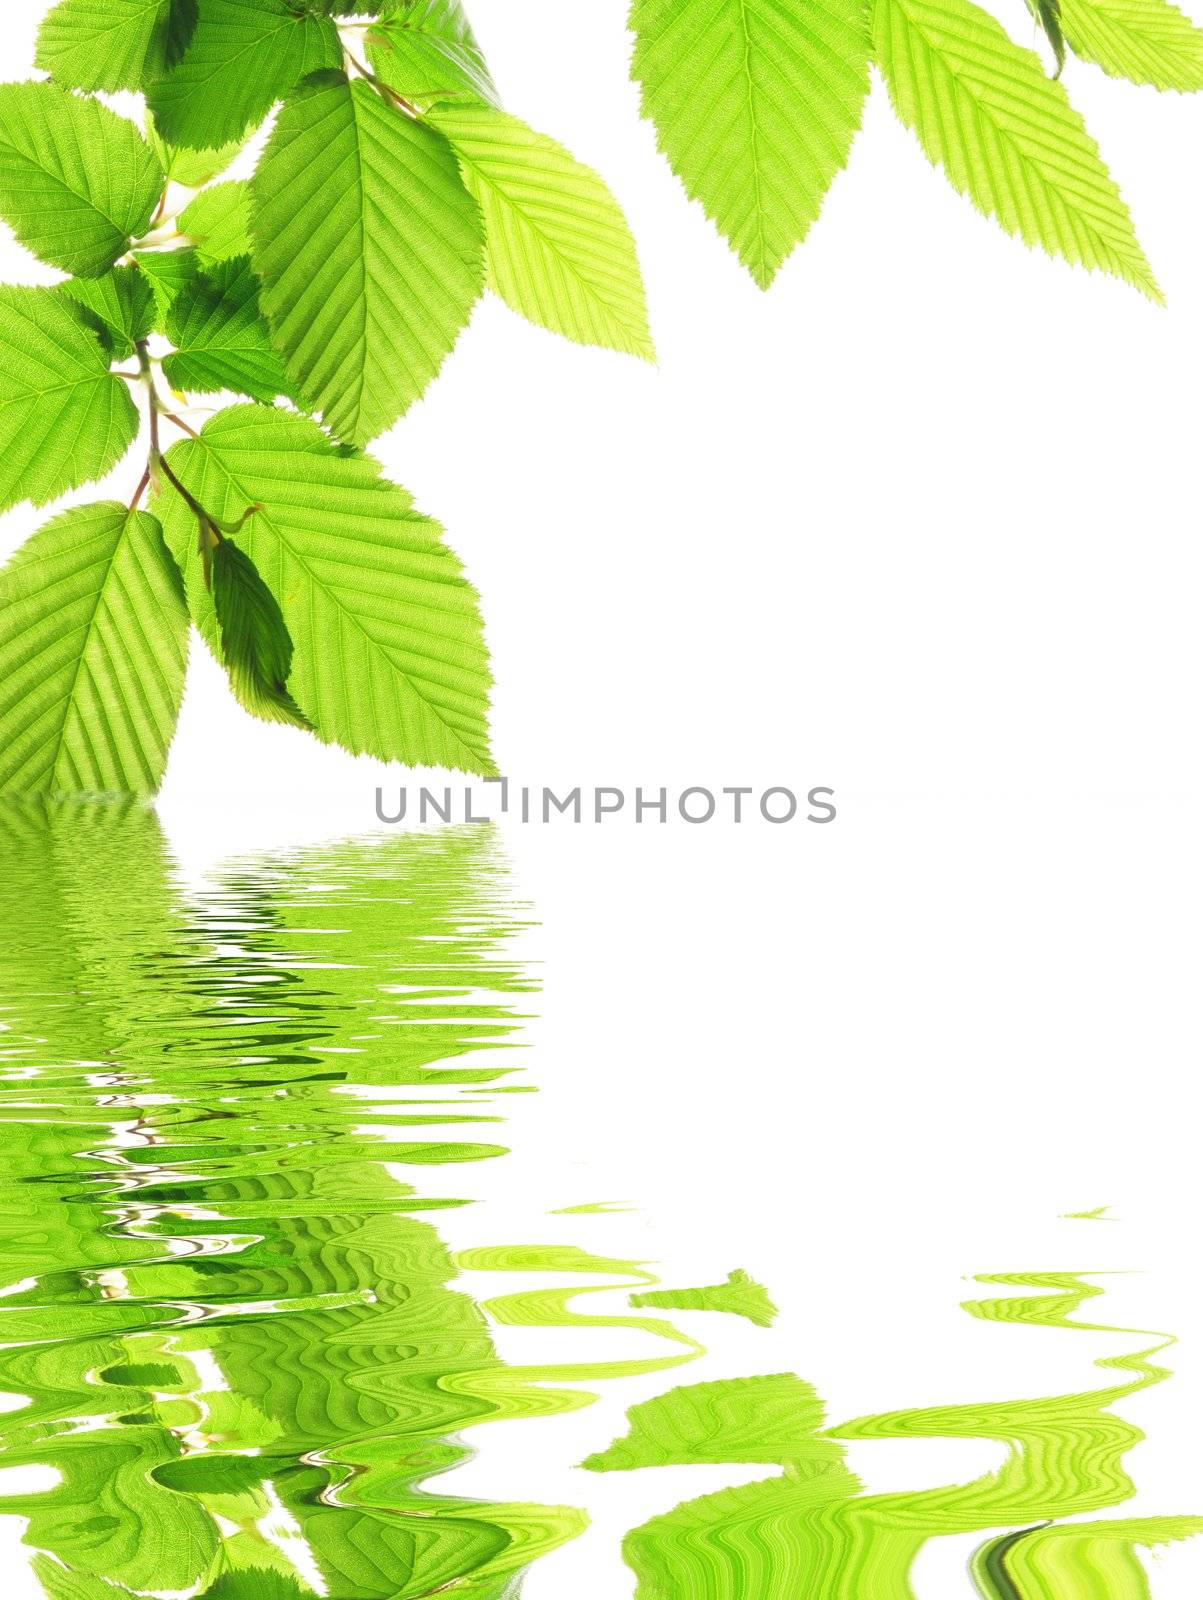 green leave and water surface with copyspace